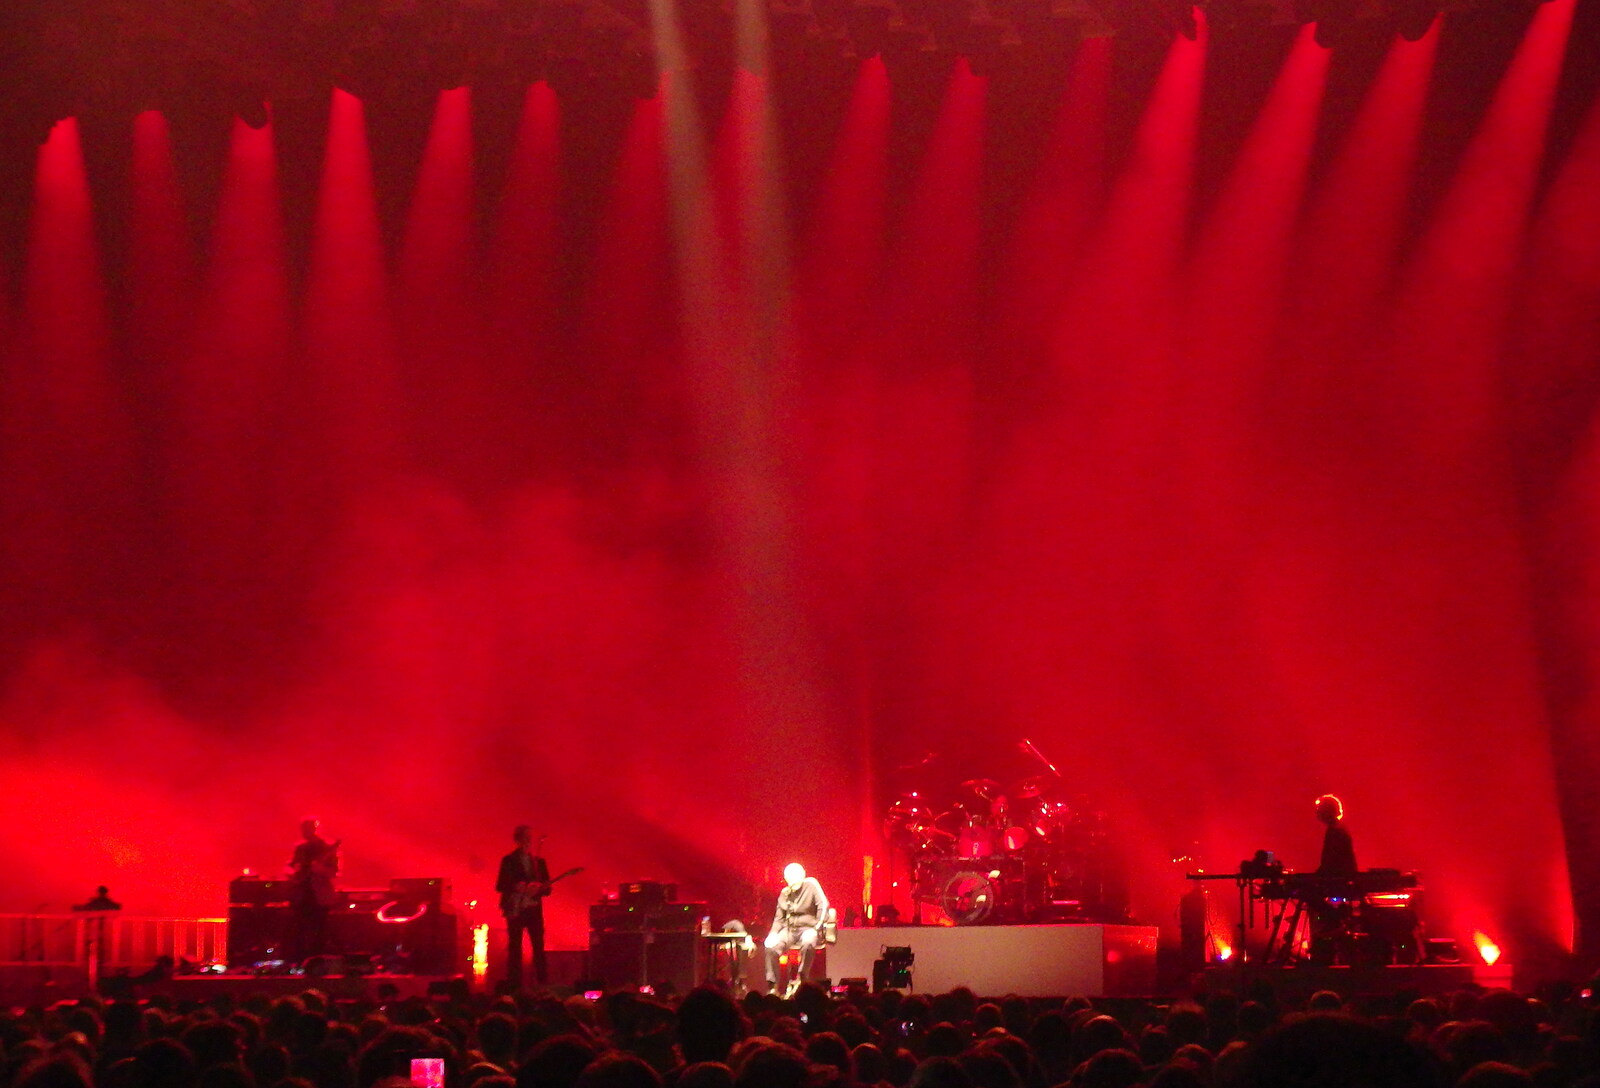 A wall of red light from Genesis at the O2, North Greenwich, London - 24th March 2022